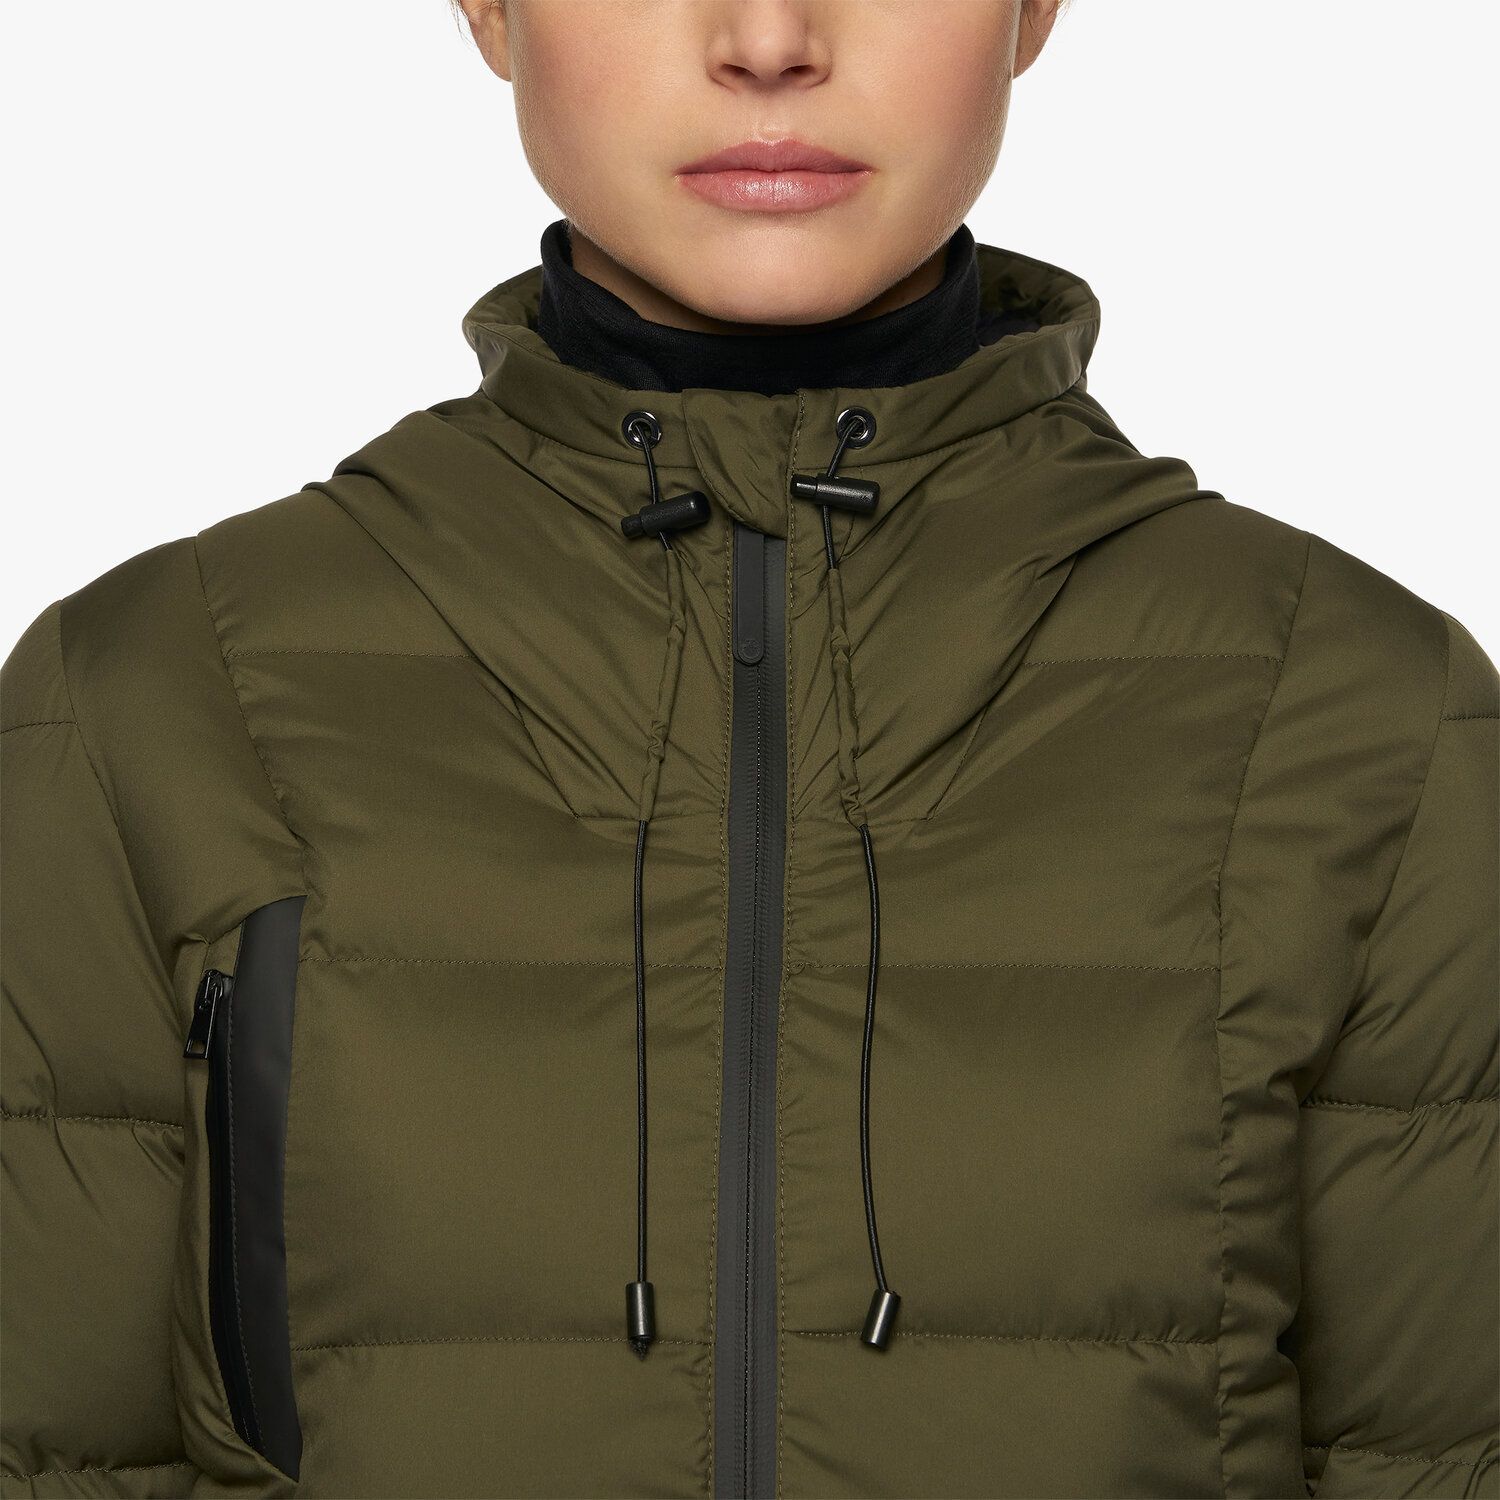 Cavalleria Toscana Women’s quilted nylon puffer jacket FOLIAGE GREEN-8